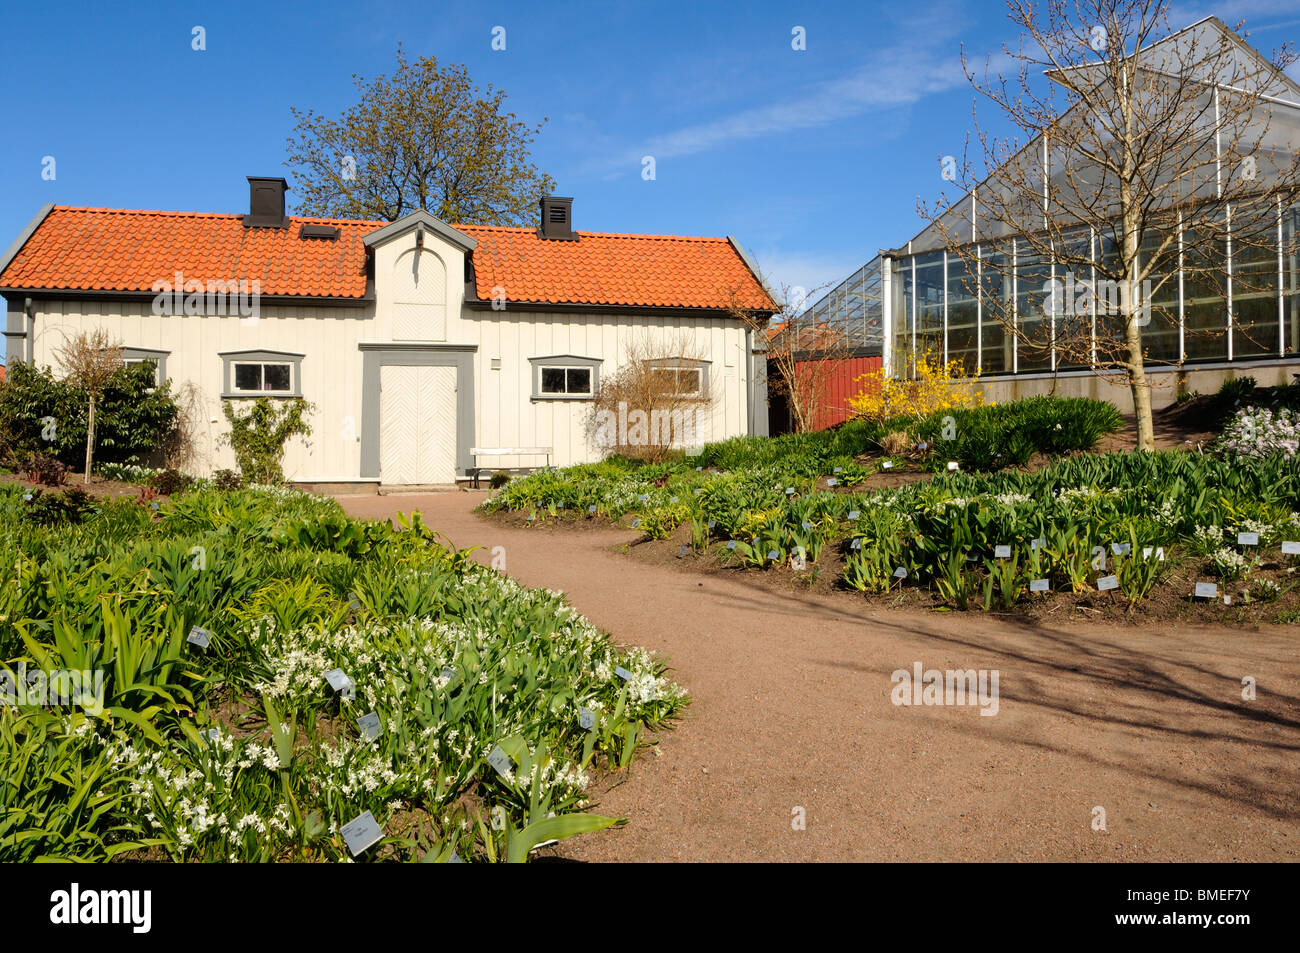 Scandinavia, Sweden, Gothenburg, View of house with garden and greenhouse Stock Photo